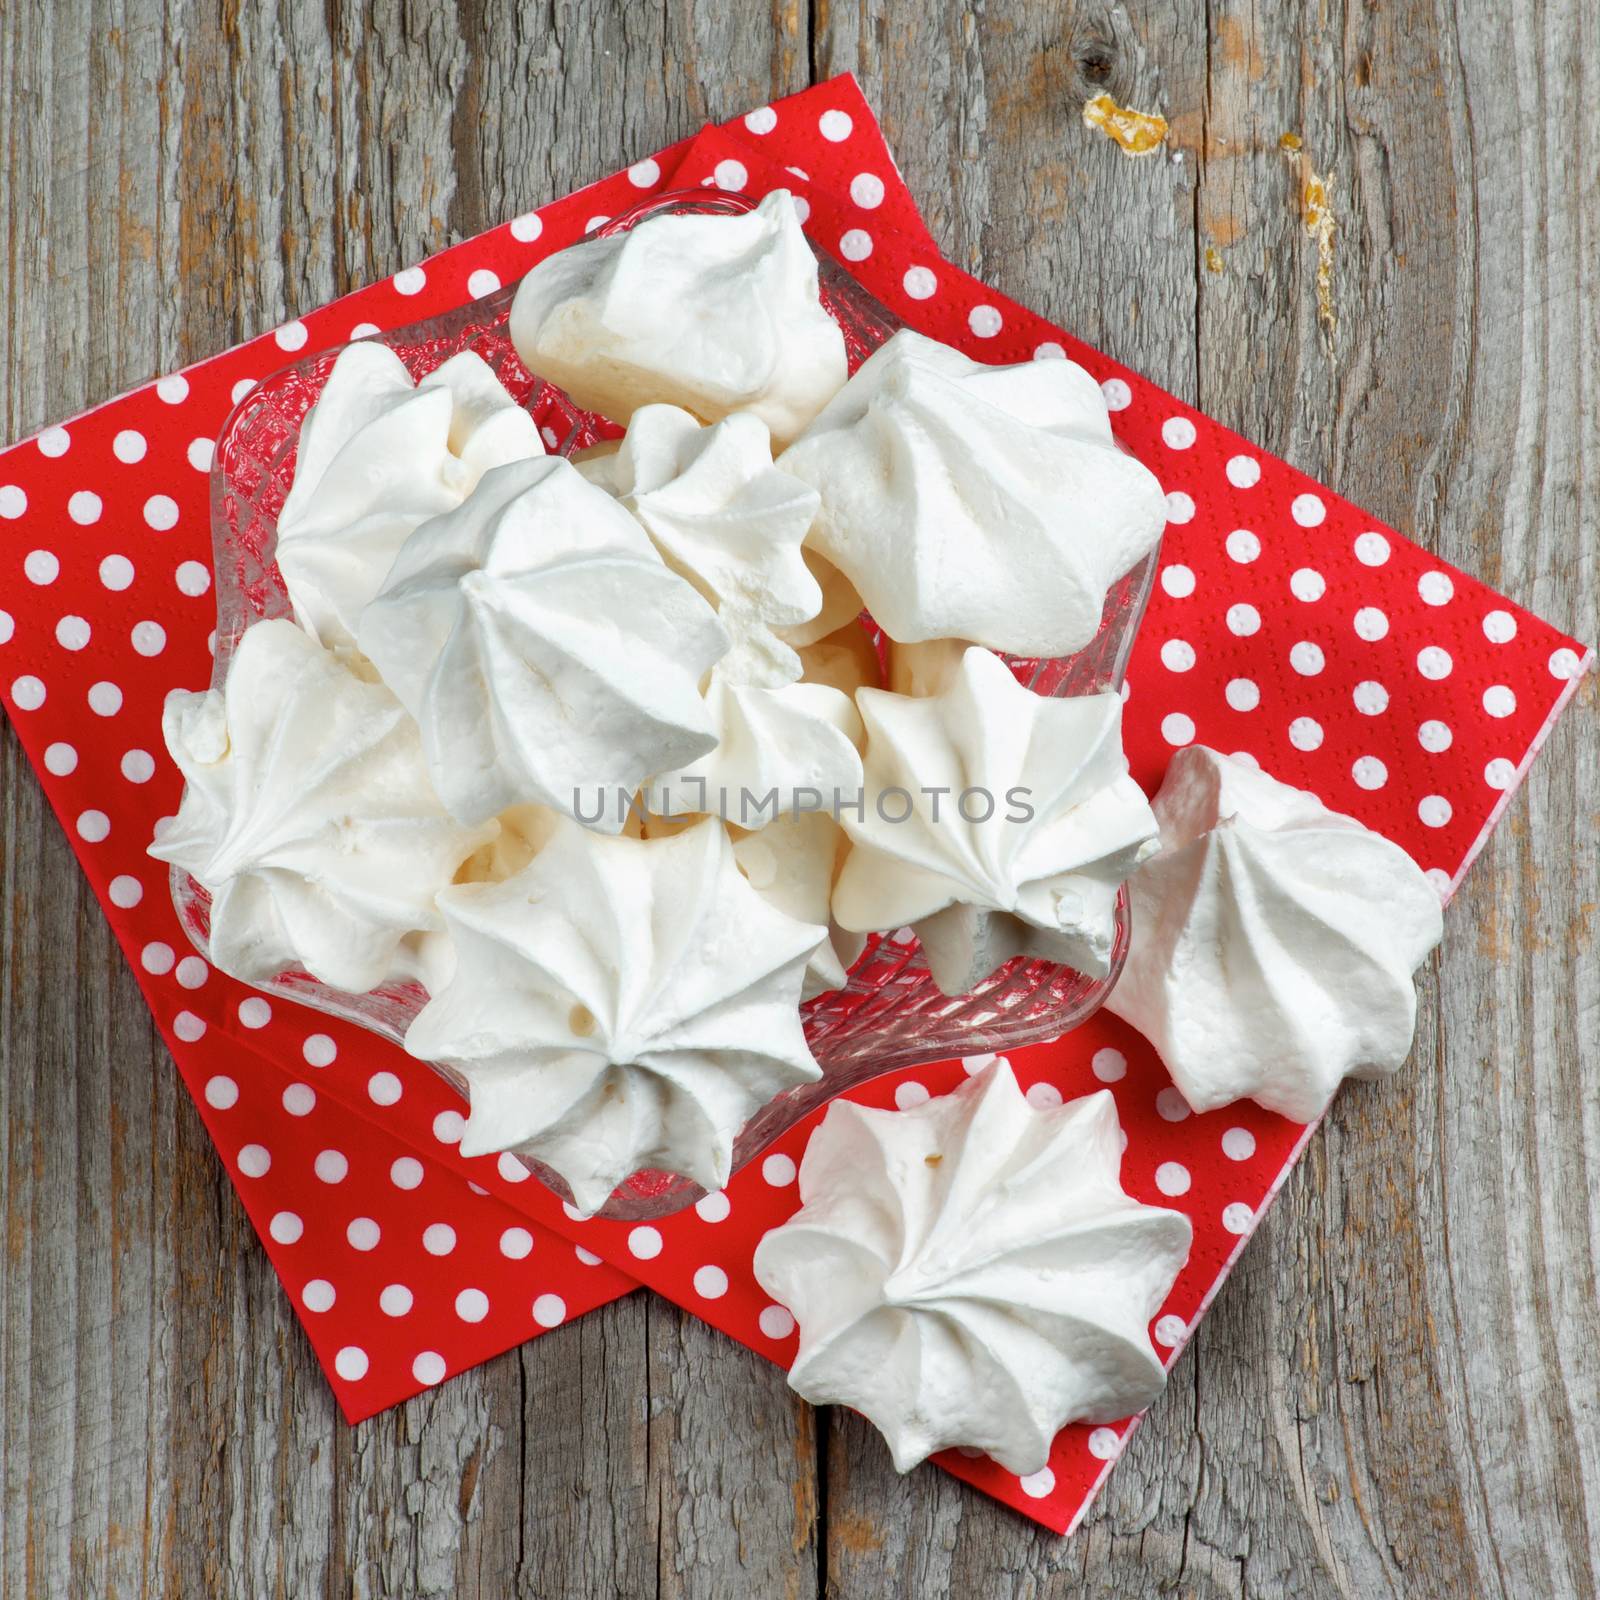 White Meringue Cookies in Dessert Vase on Red Polka Dot Napkin closeup. Top View on Wooden background